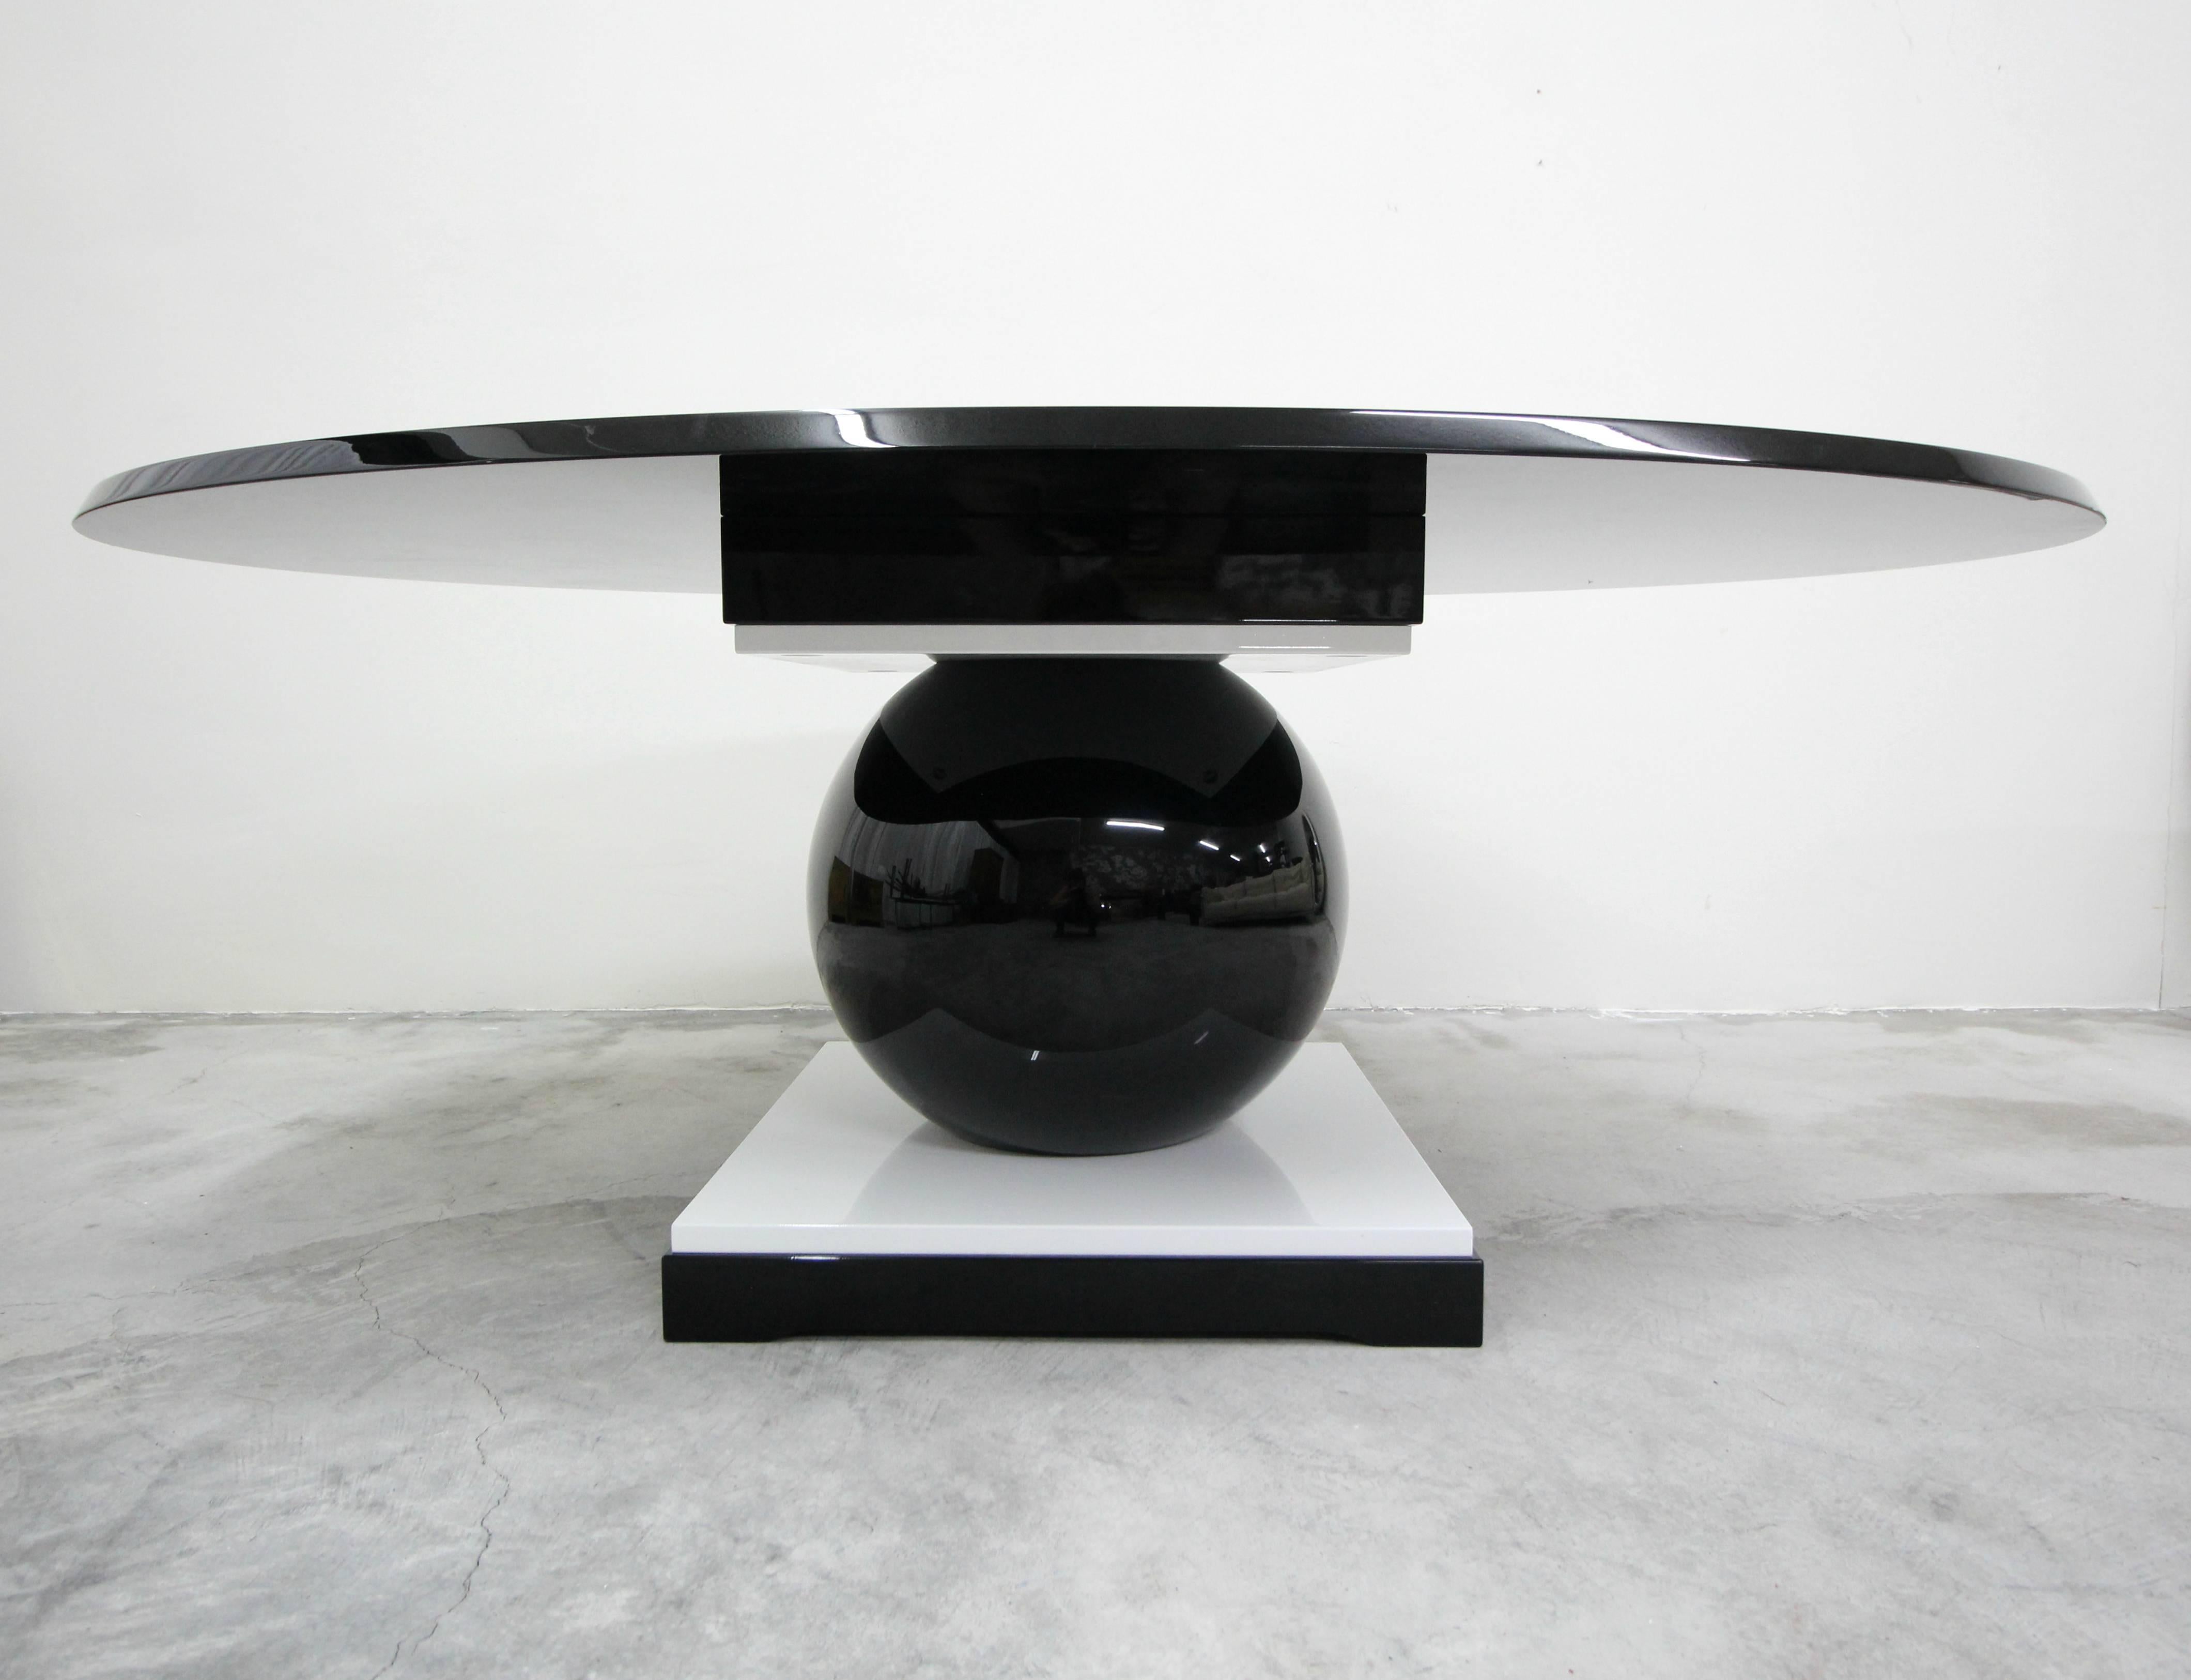 This rare and incredibly chic lacquered oval dining table was designed in 1918 by Jacques-Henri Lartigue.

Lartrigue designed this table for his own use. The gorgeous oval top and base are constructed of black and white lacquered wood with a resin